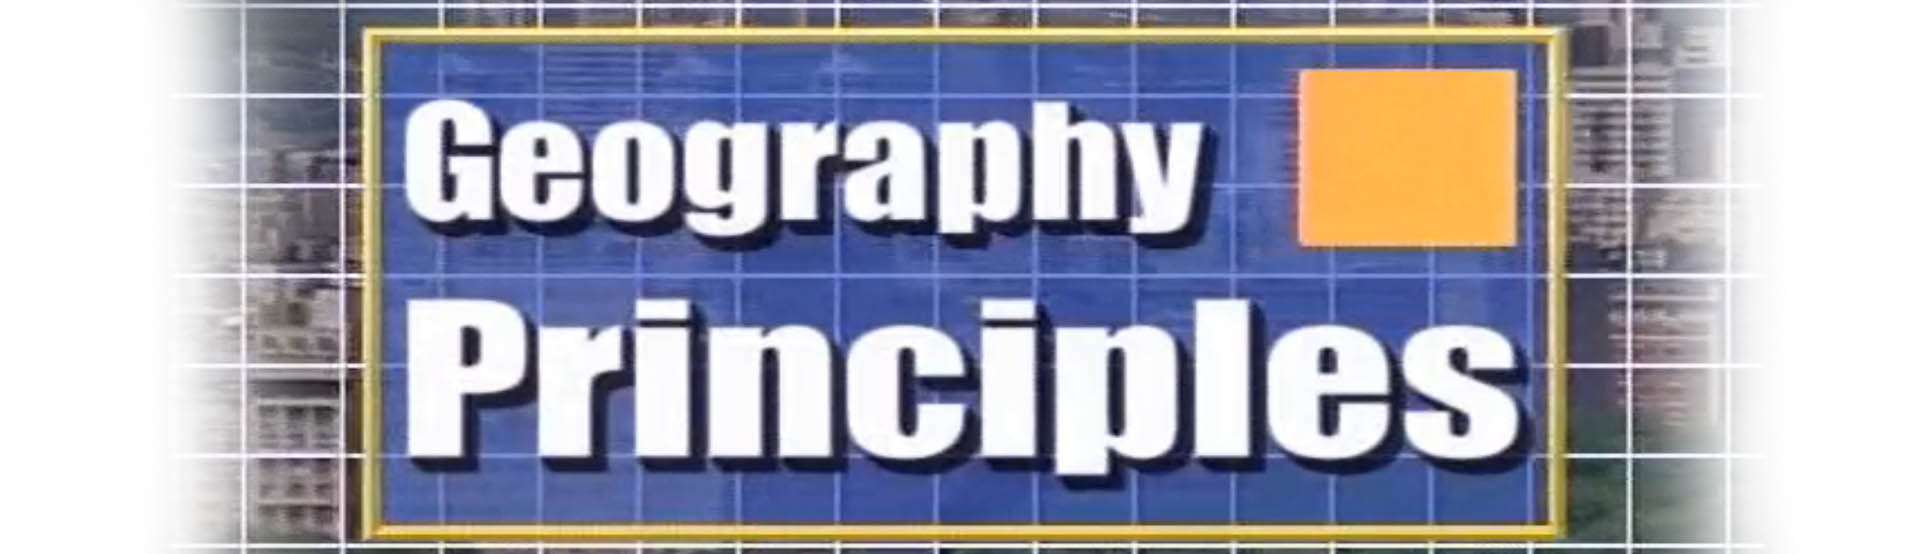 Geography Principles